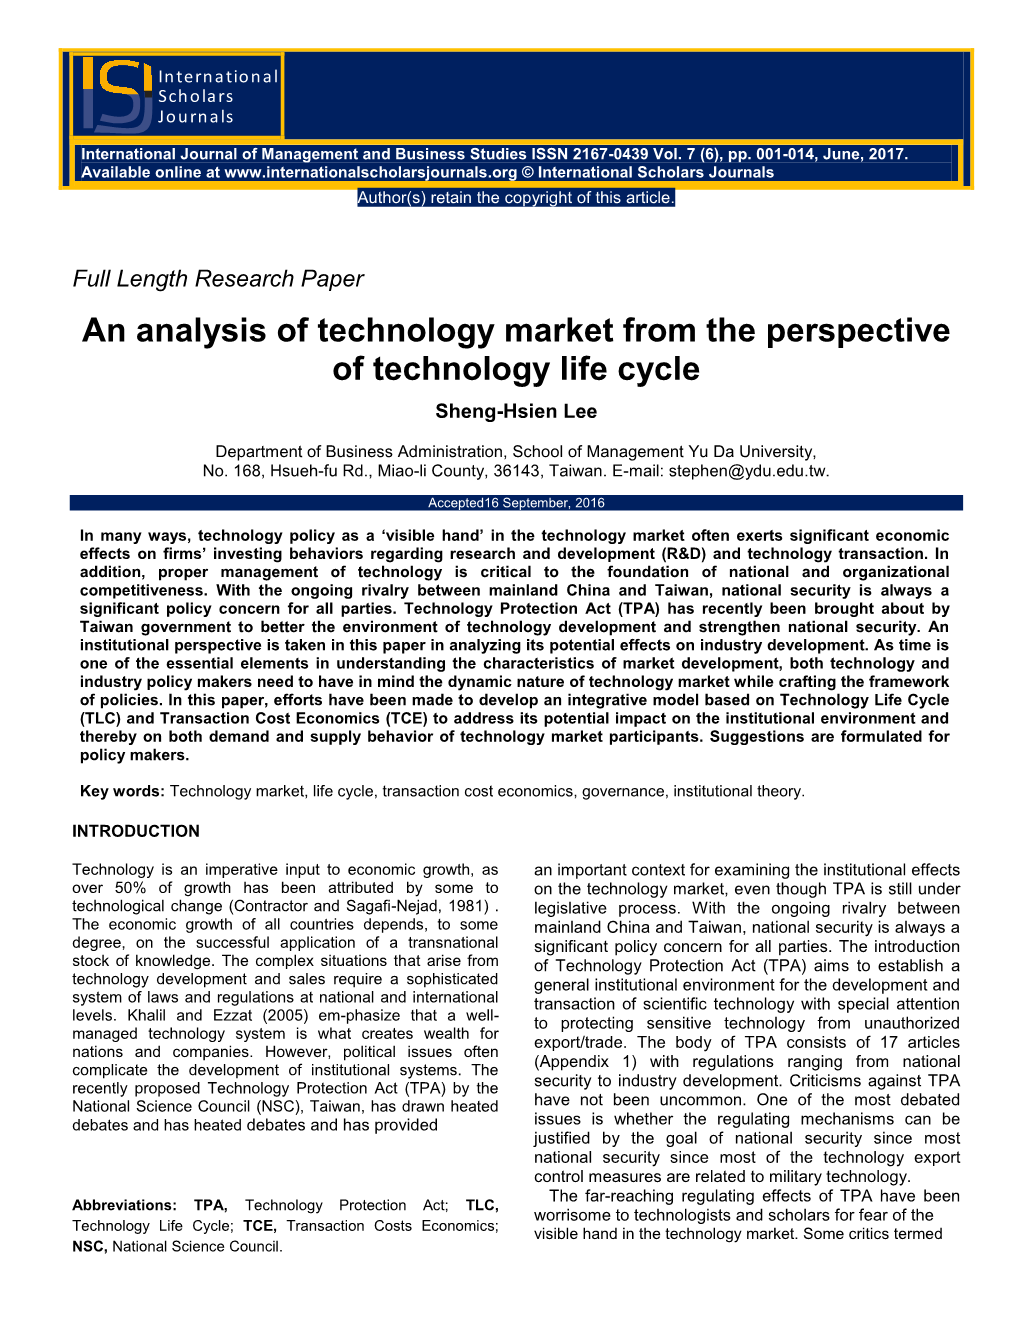 An Analysis of Technology Market from the Perspective of Technology Life Cycle